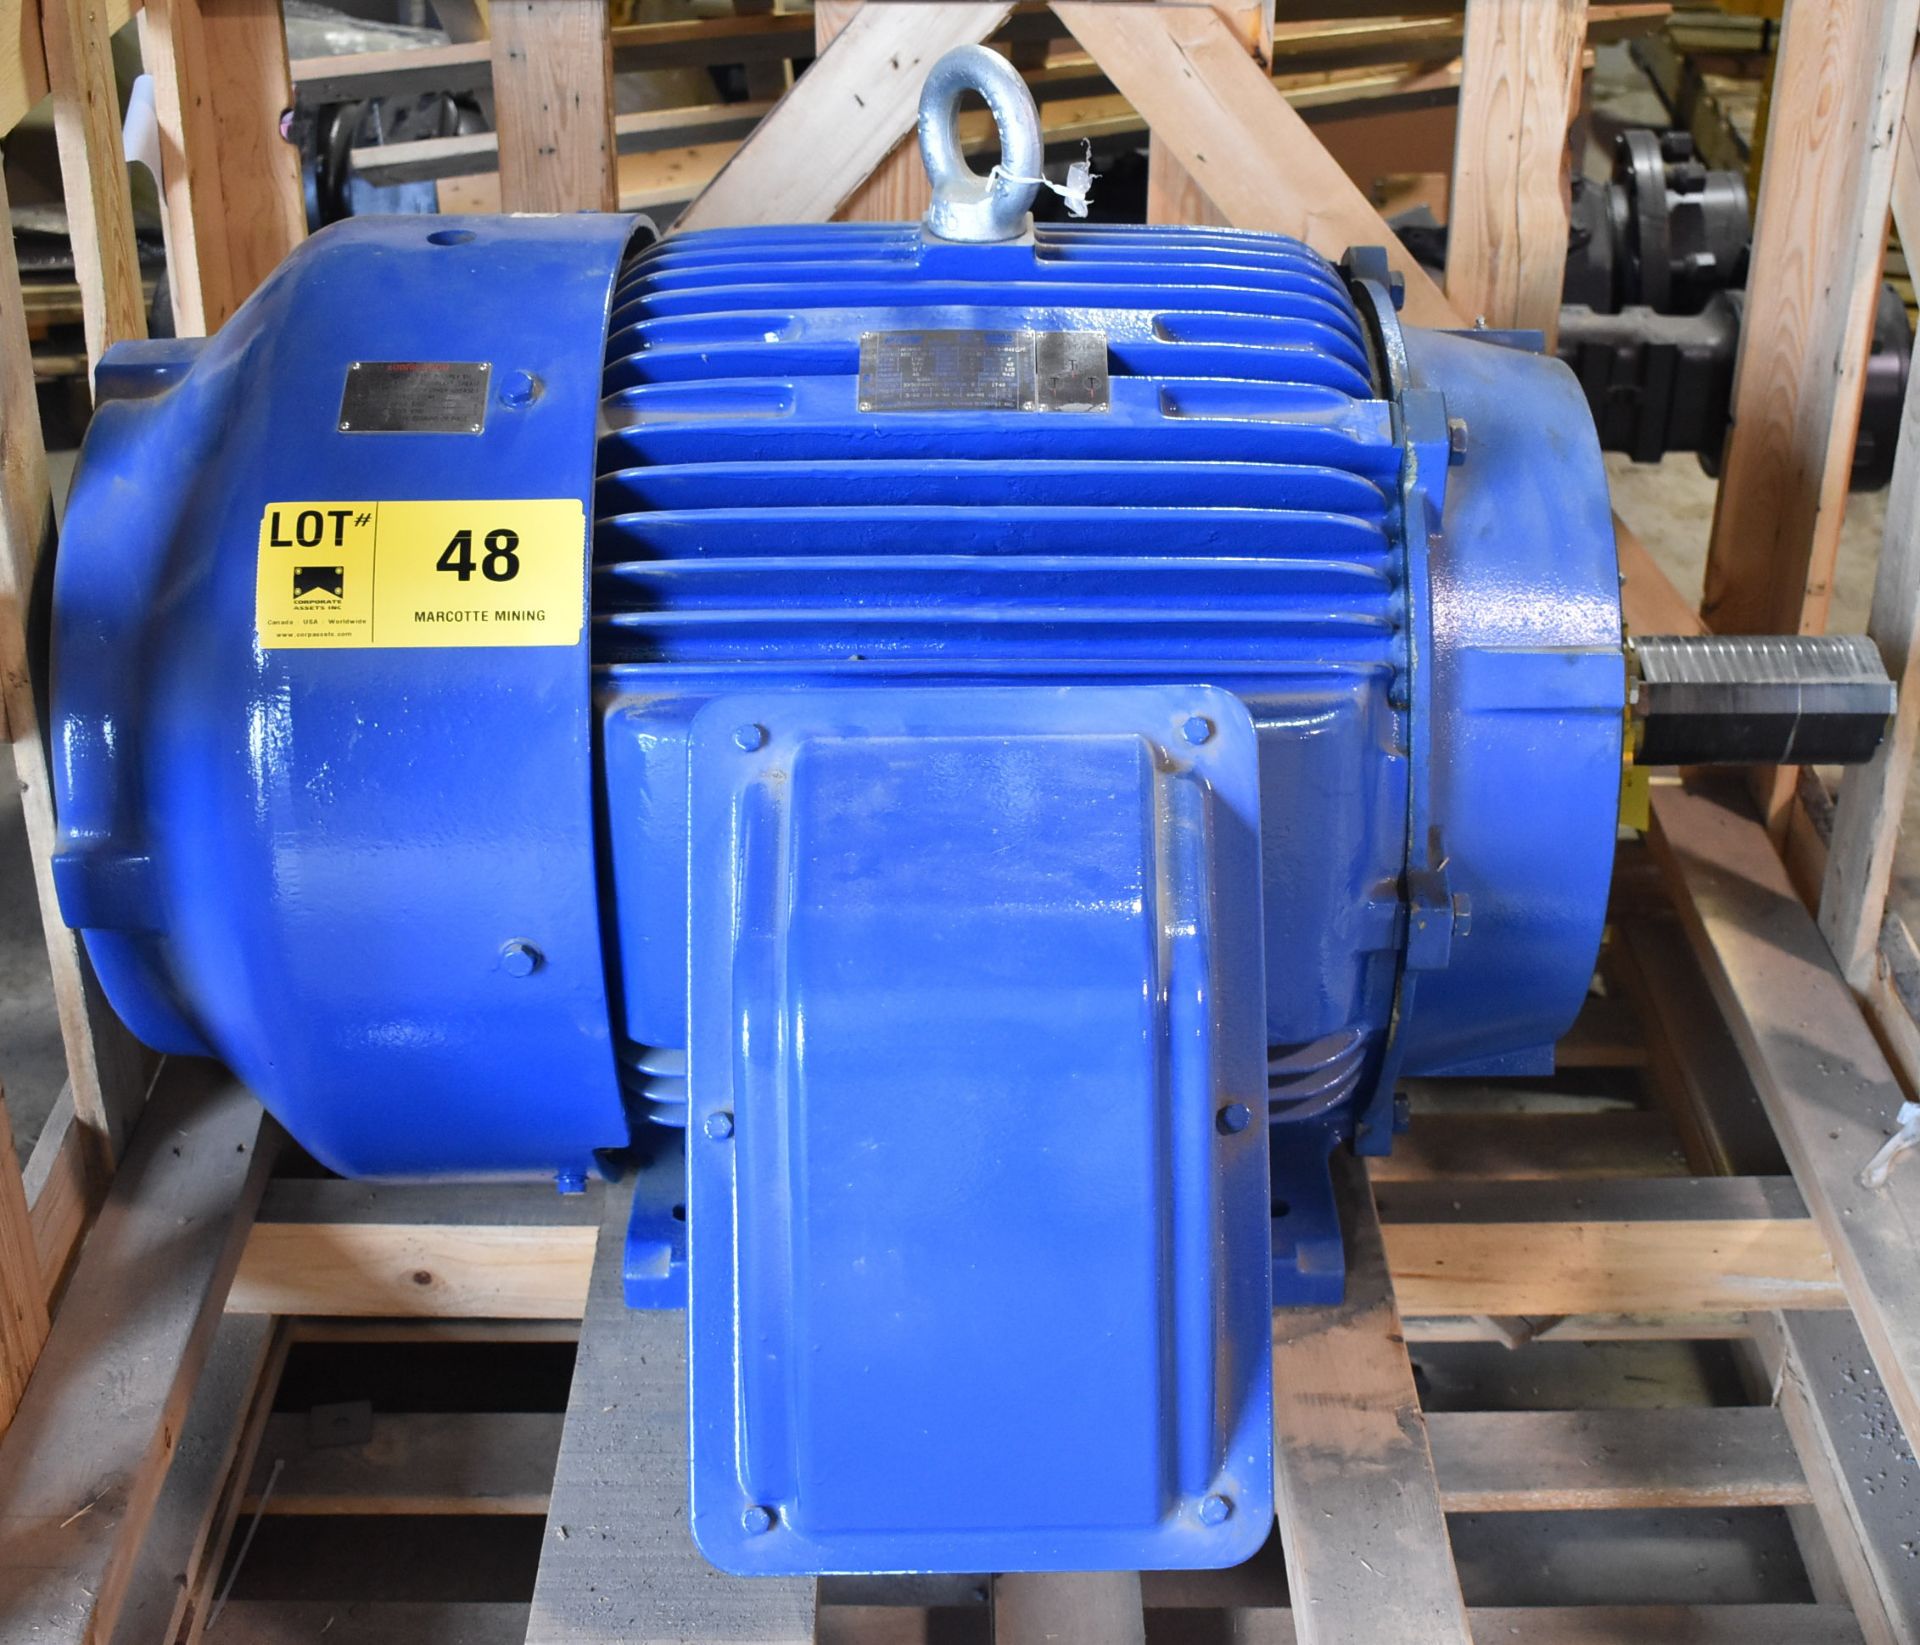 WESTINGHOUSE AEHH8B 125 HP ELECTRIC MOTOR WITH 1780 RPM, 575V, 3 PHASE, 117A, 60 HZ, 444T FRAME (